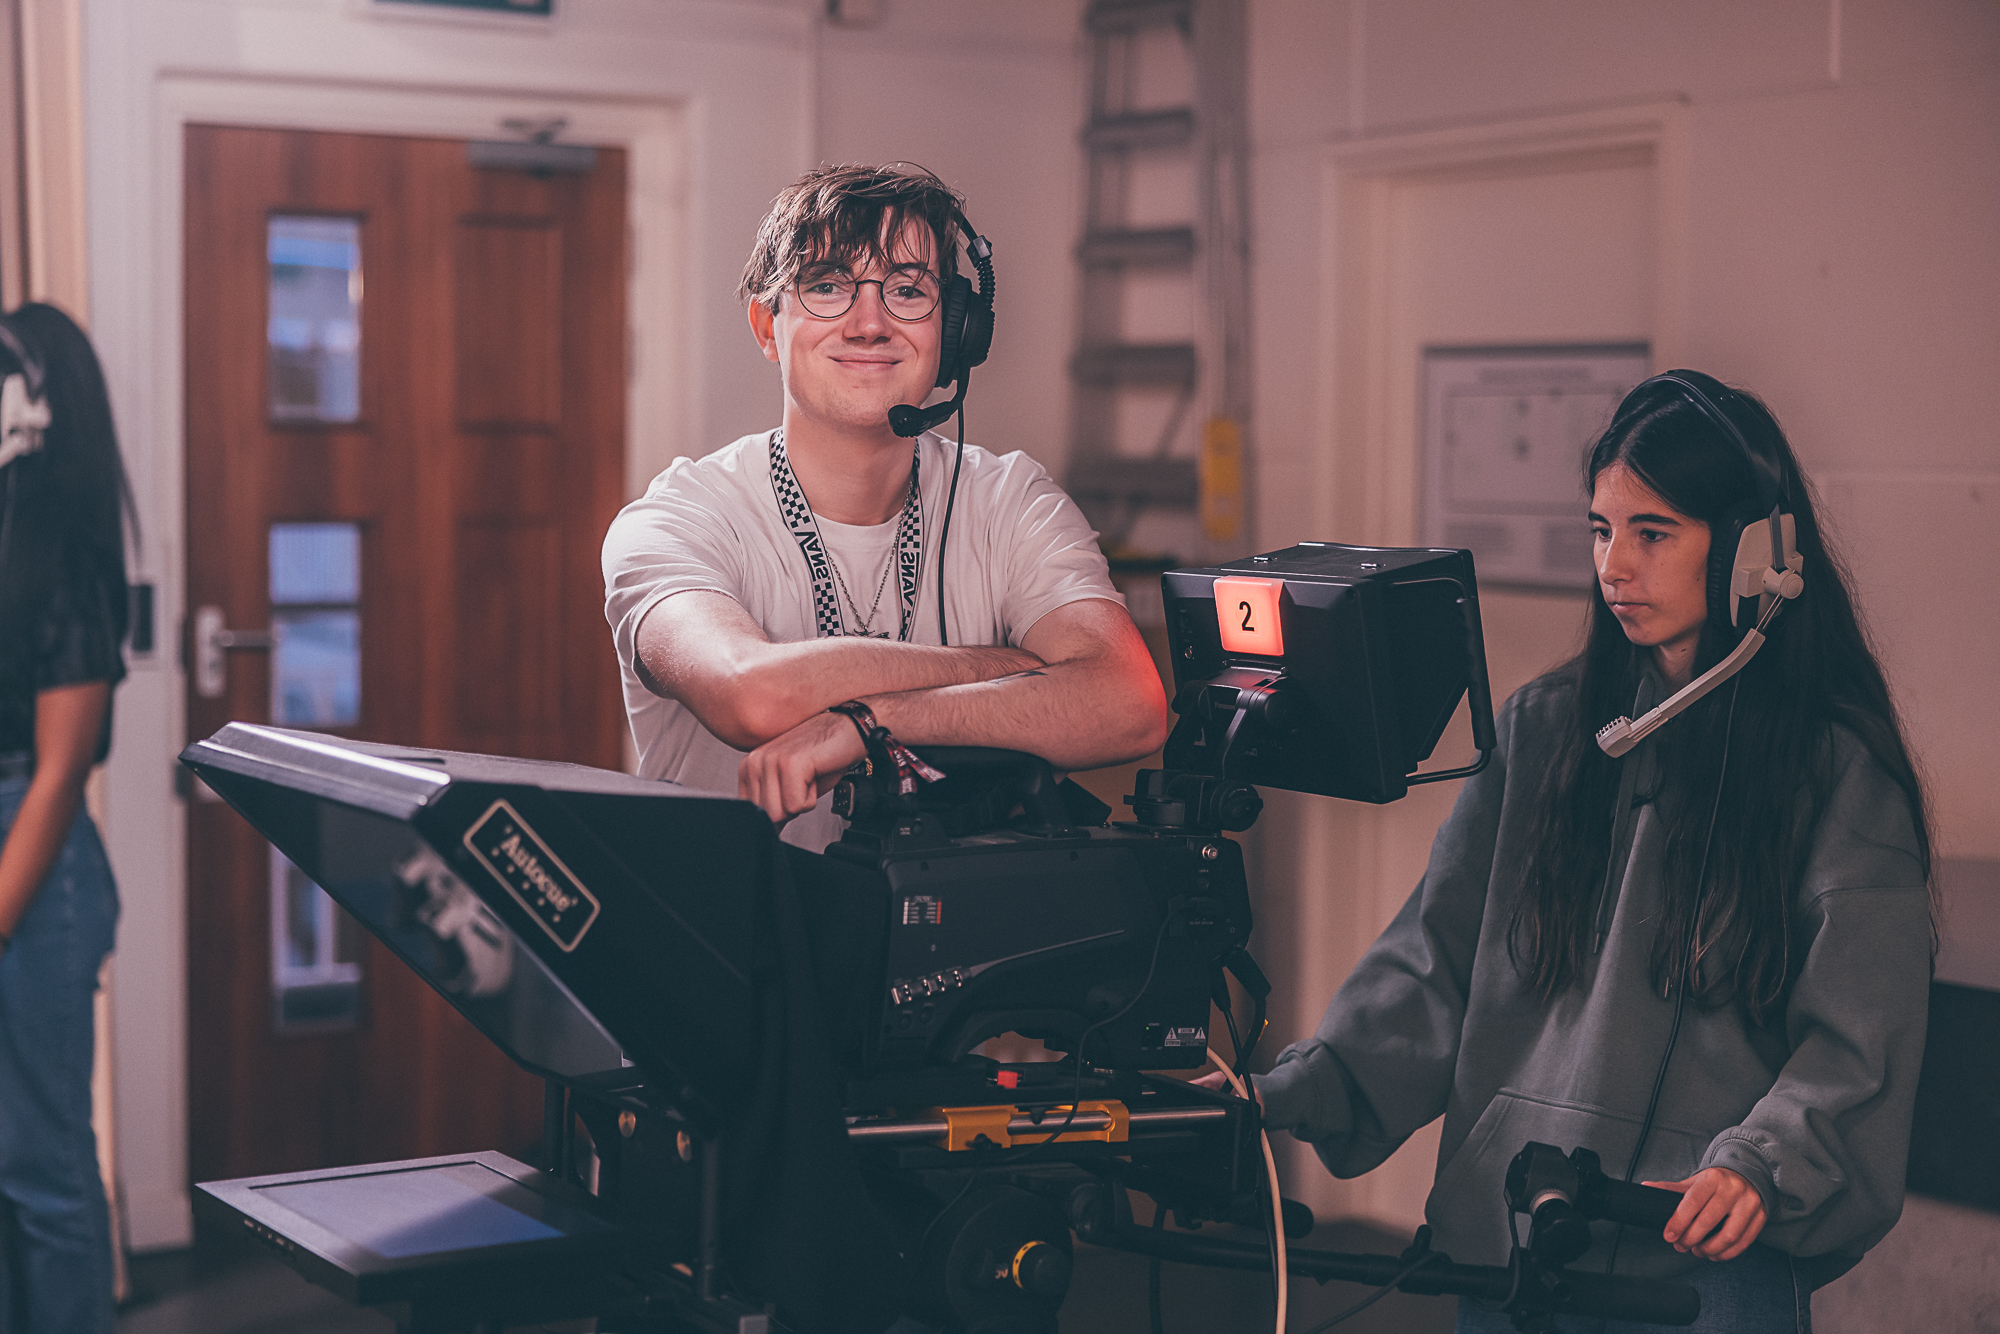 Male student leaning over film camera while female student operates it